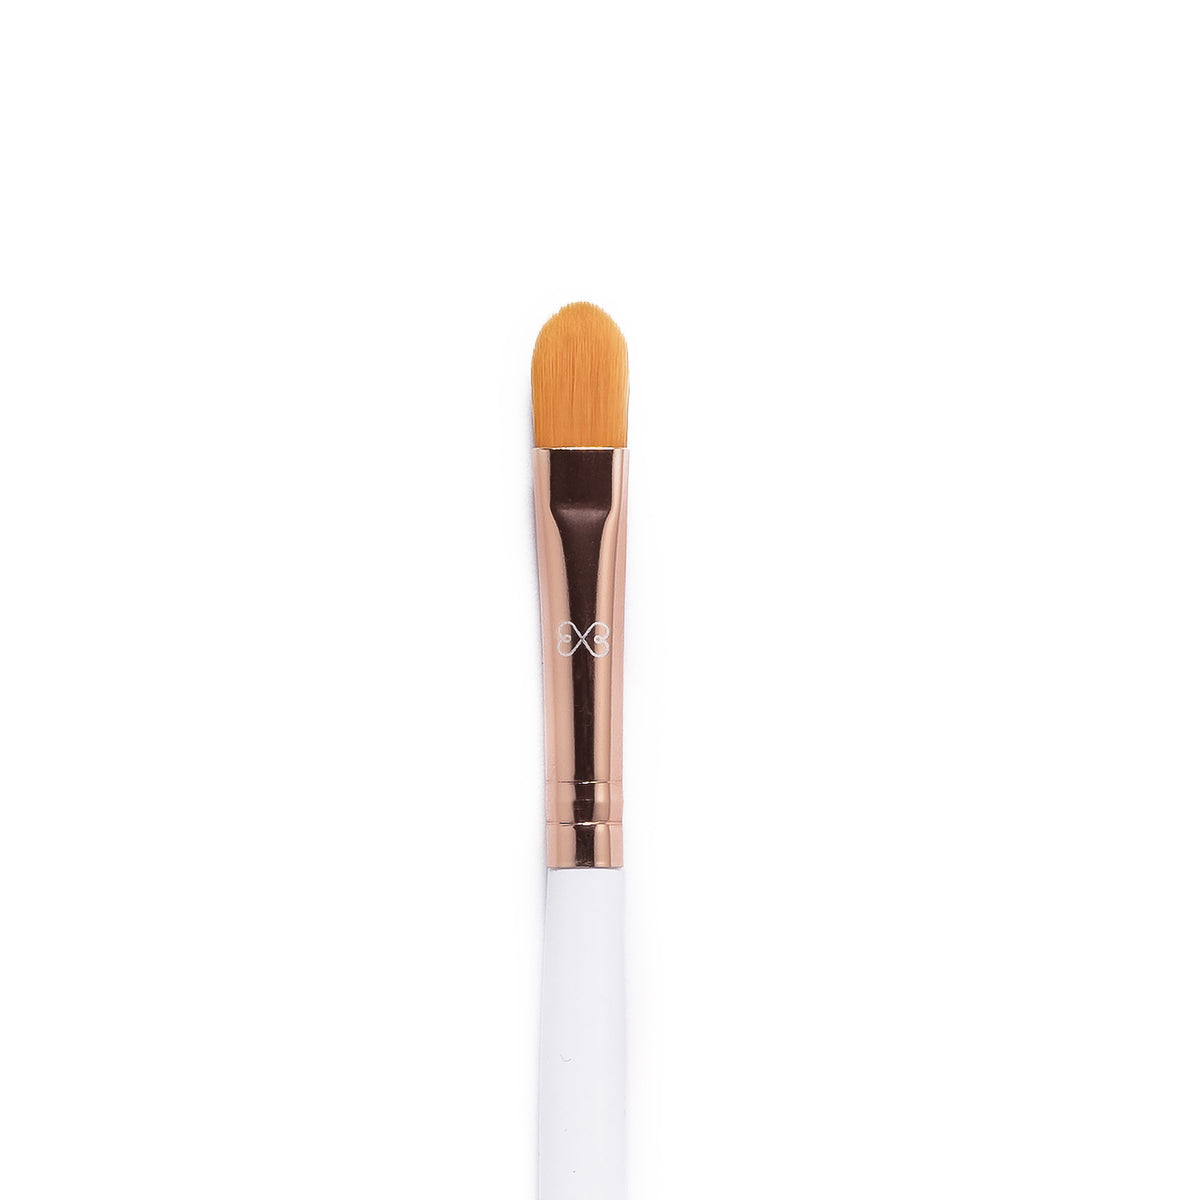 Flat Shader Concealer Brush - Boujee Beauty